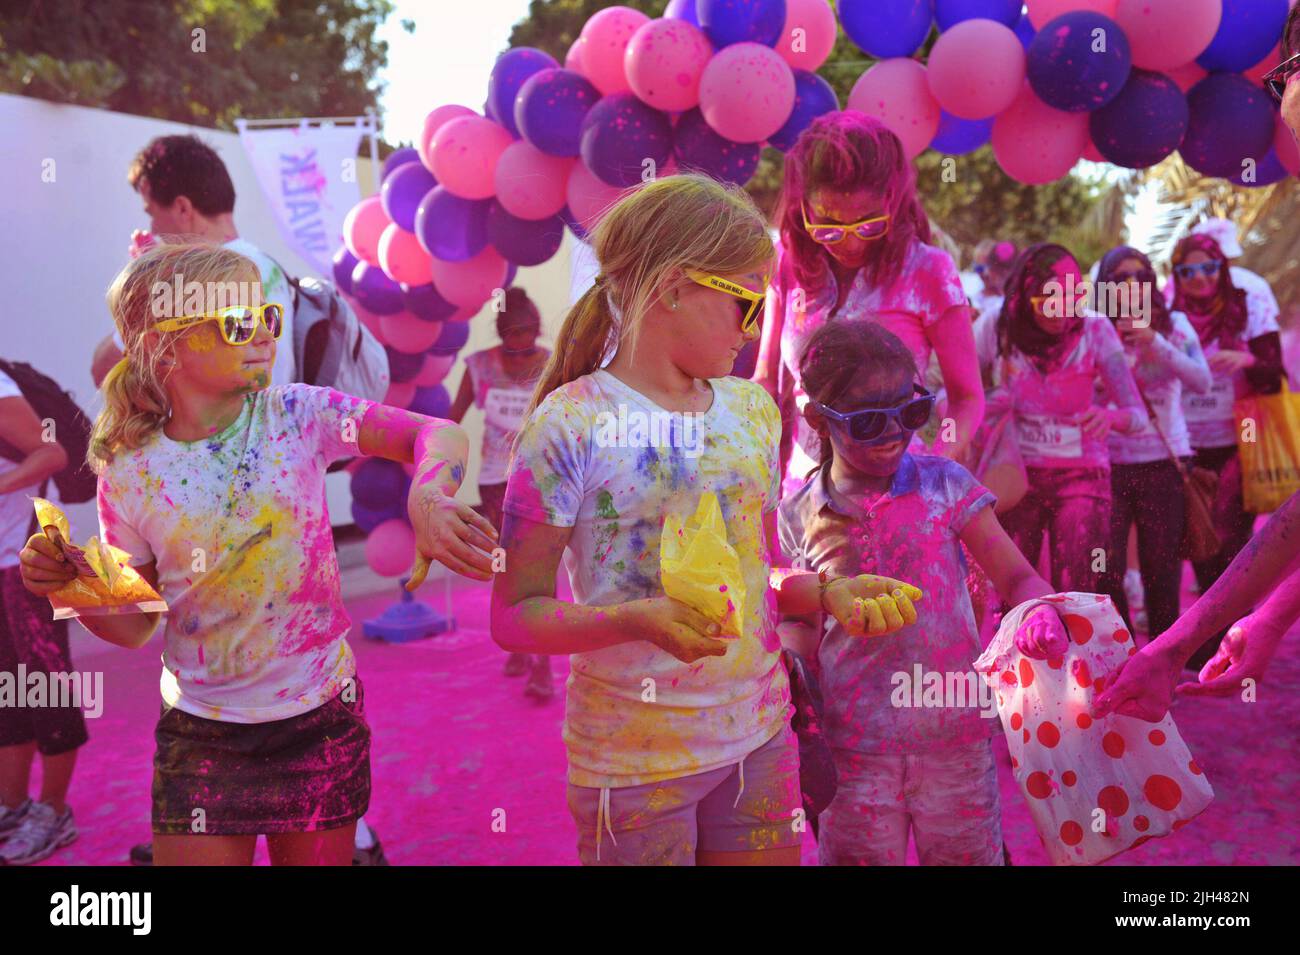 Young blonde girls wearing yellow shades stop to grab more colored powder past a pink balloon arch at the Color Walk in Dubai, United Arab Emirates. Stock Photo